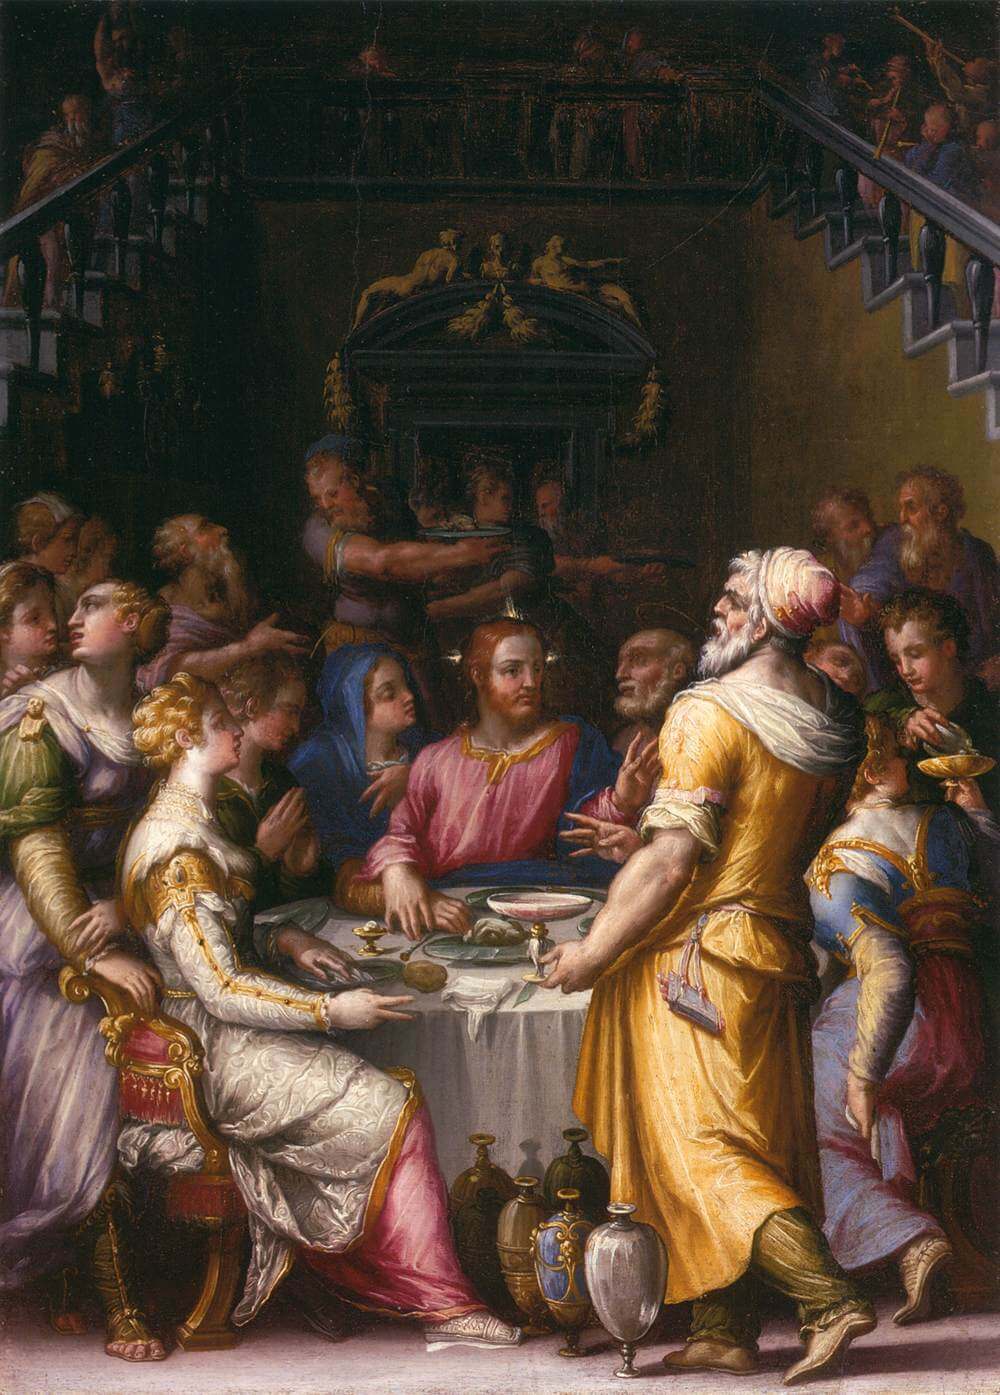 A discussion of The Wedding at Cana by Paolo Veronese